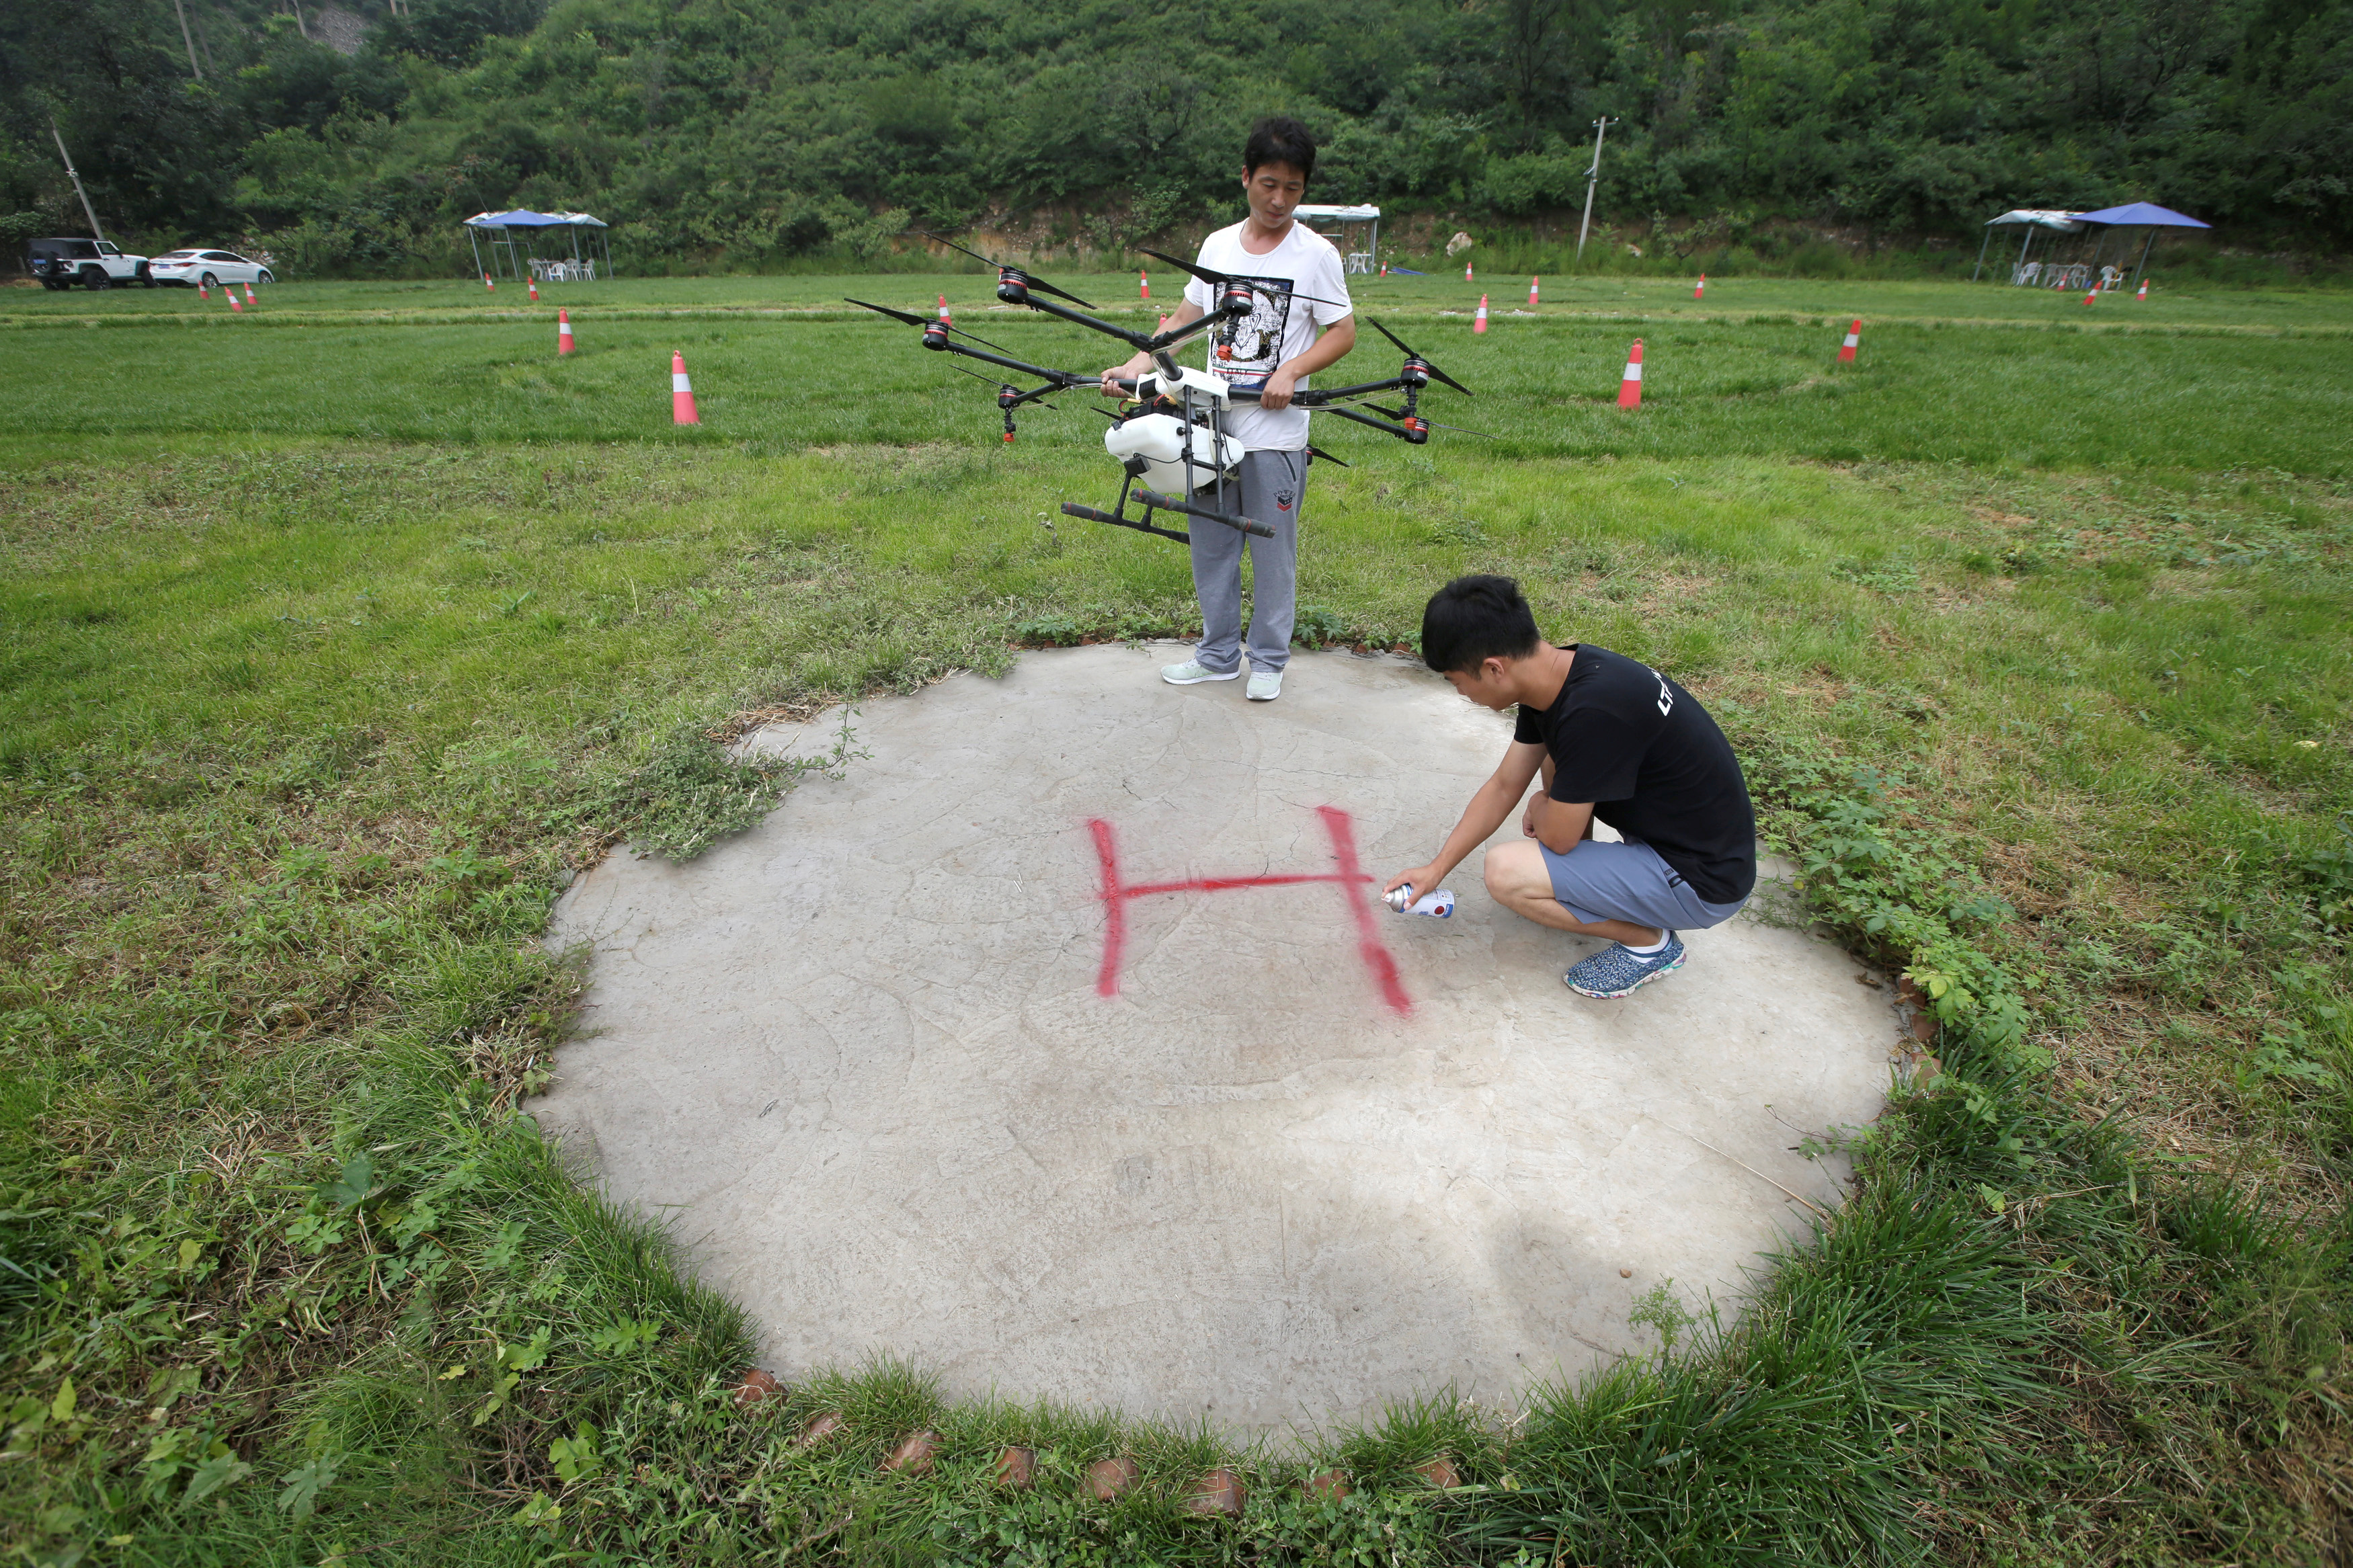 An instructor sets up landing sign as a trainee prepares to learn to fly an aerosol drone at LTFY drone training school on the outskirts of Beijing